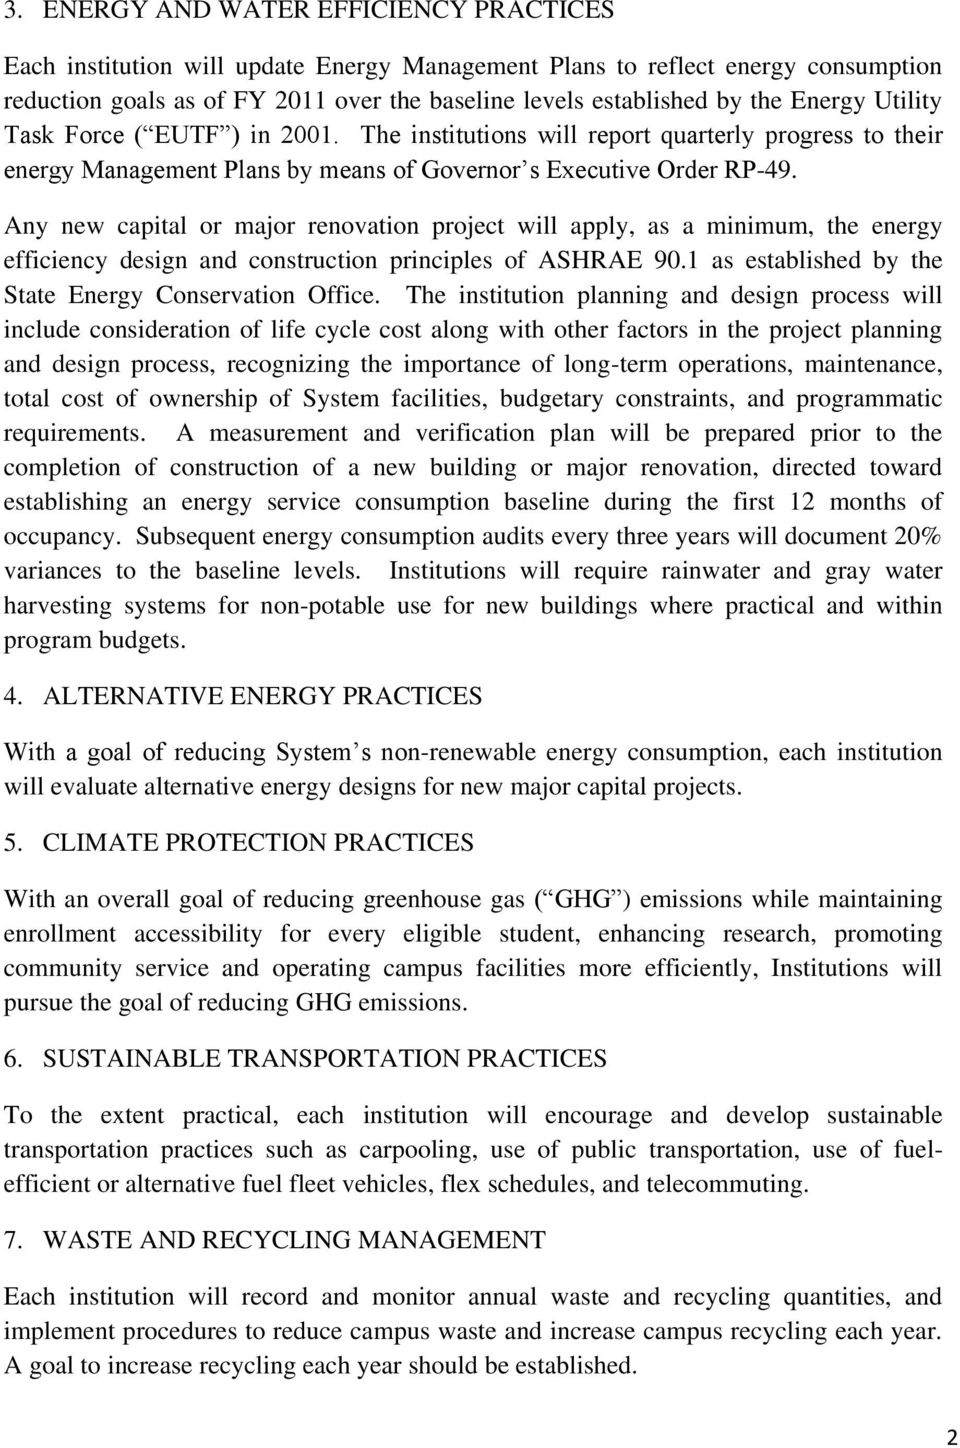 Any new capital or major renovation project will apply, as a minimum, the energy efficiency design and construction principles of ASHRAE 90.1 as established by the State Energy Conservation Office.